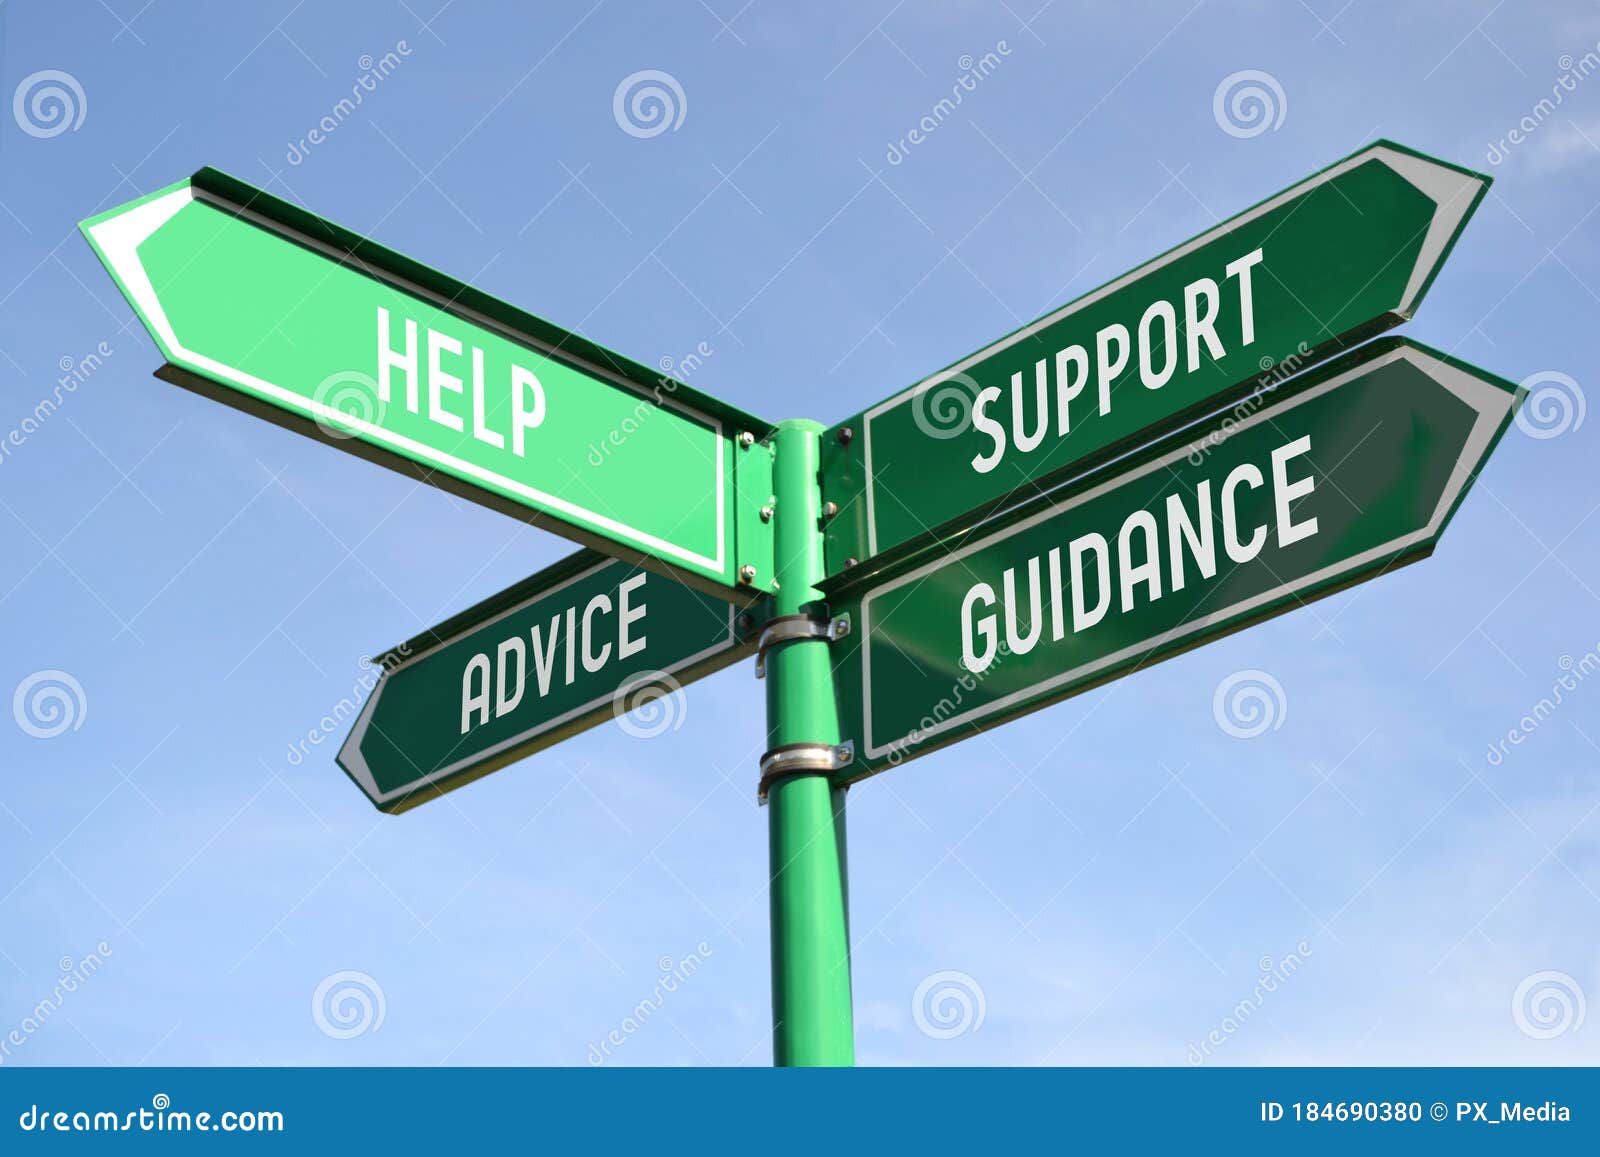 help, support, advice, guidance - green signpost with for arrows